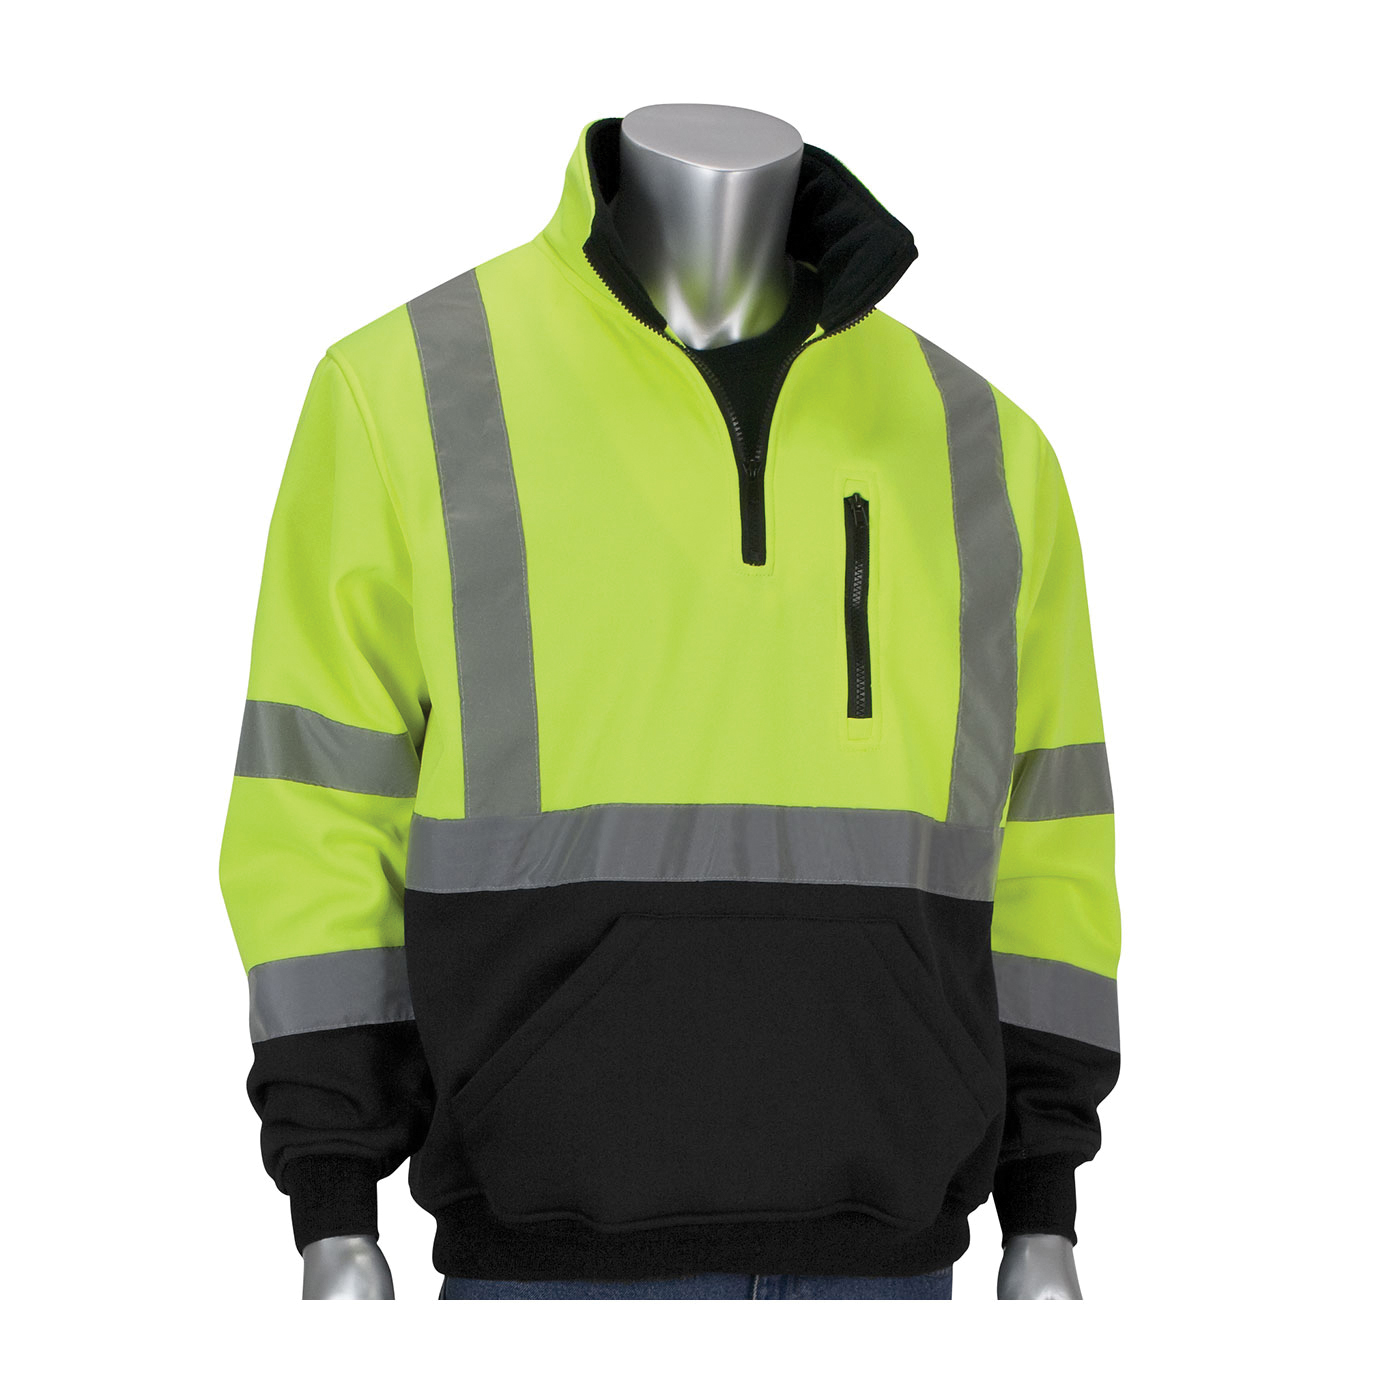 PIP® 323-1330B-LY/L Sweatshirt With Black Bottom, Unisex, L, Lime Yellow, 30 in L, Polyester Fleece